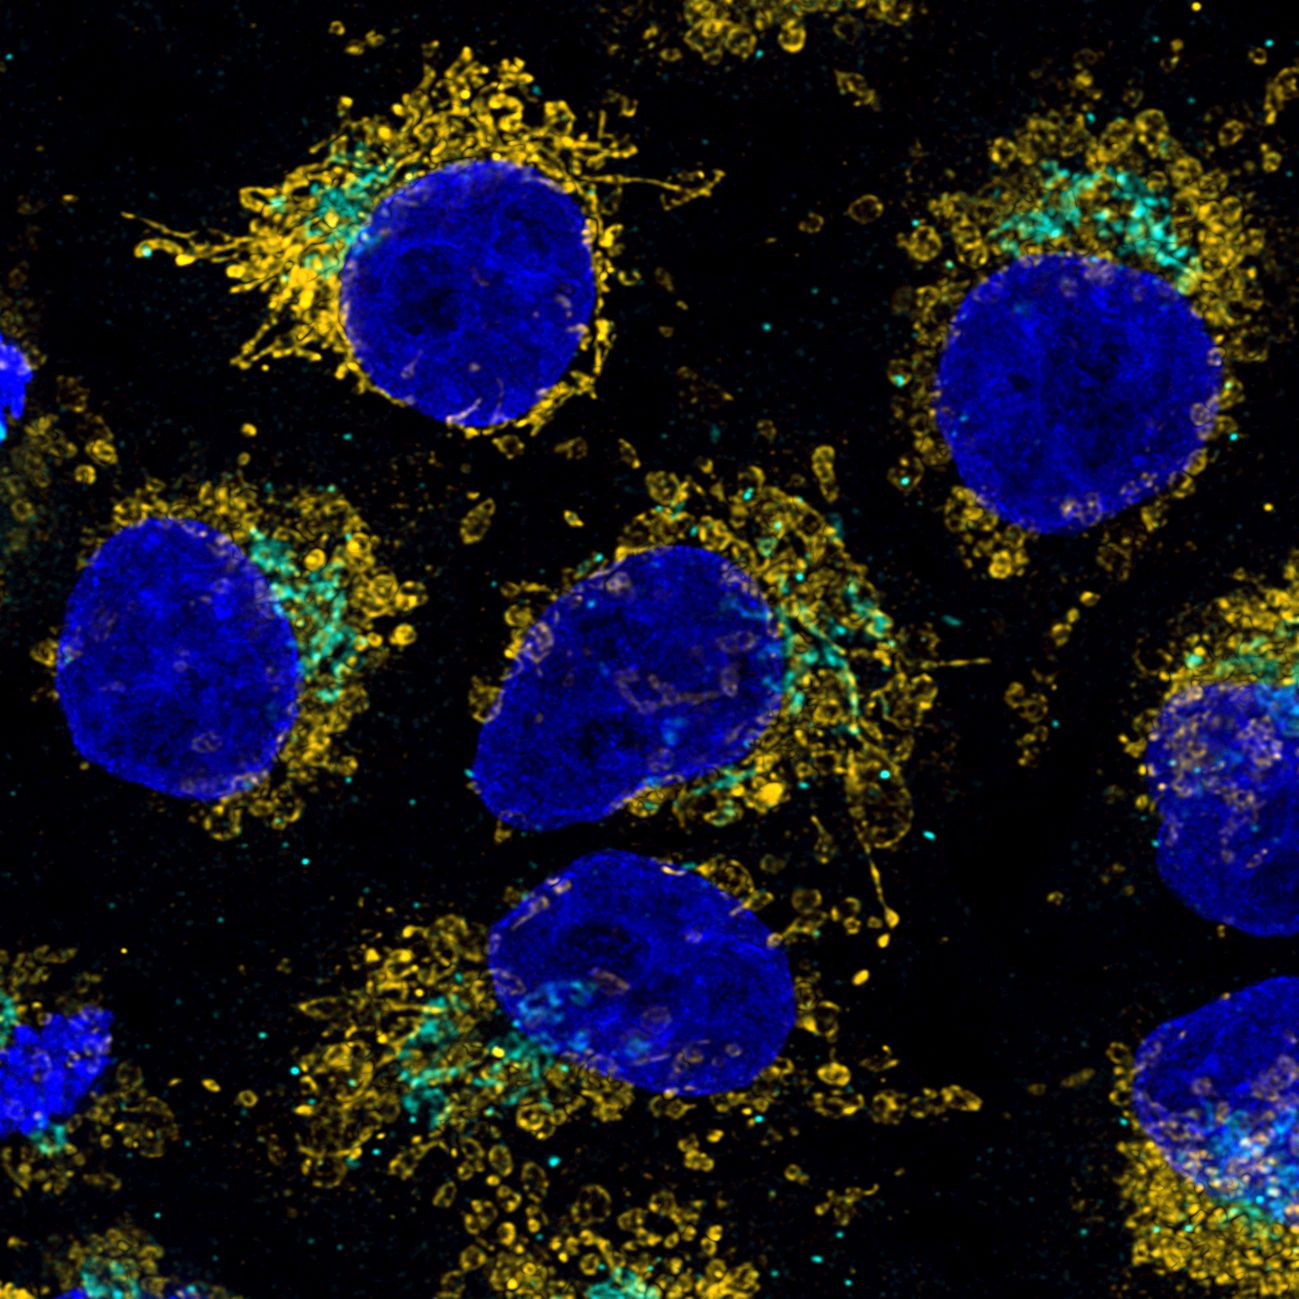 Immunofluorescence of HeLa: PFA-fixed HeLa cells were stained with anti-HSP60 (66041-1-Ig) labeled with FlexAble CoraLite® Plus 550 Kit (KFA022, yellow), anti-GORASP2 (66627-1-Ig) labeled with FlexAble CoraLite® Plus 650 Kit (KFA023, cyan) and DAPI (blue). ​Confocal images were acquired with a 100x oil objective and post-processed. Images were recorded at the Core Facility Bioimaging at the Biomedical Center, LMU Munich.